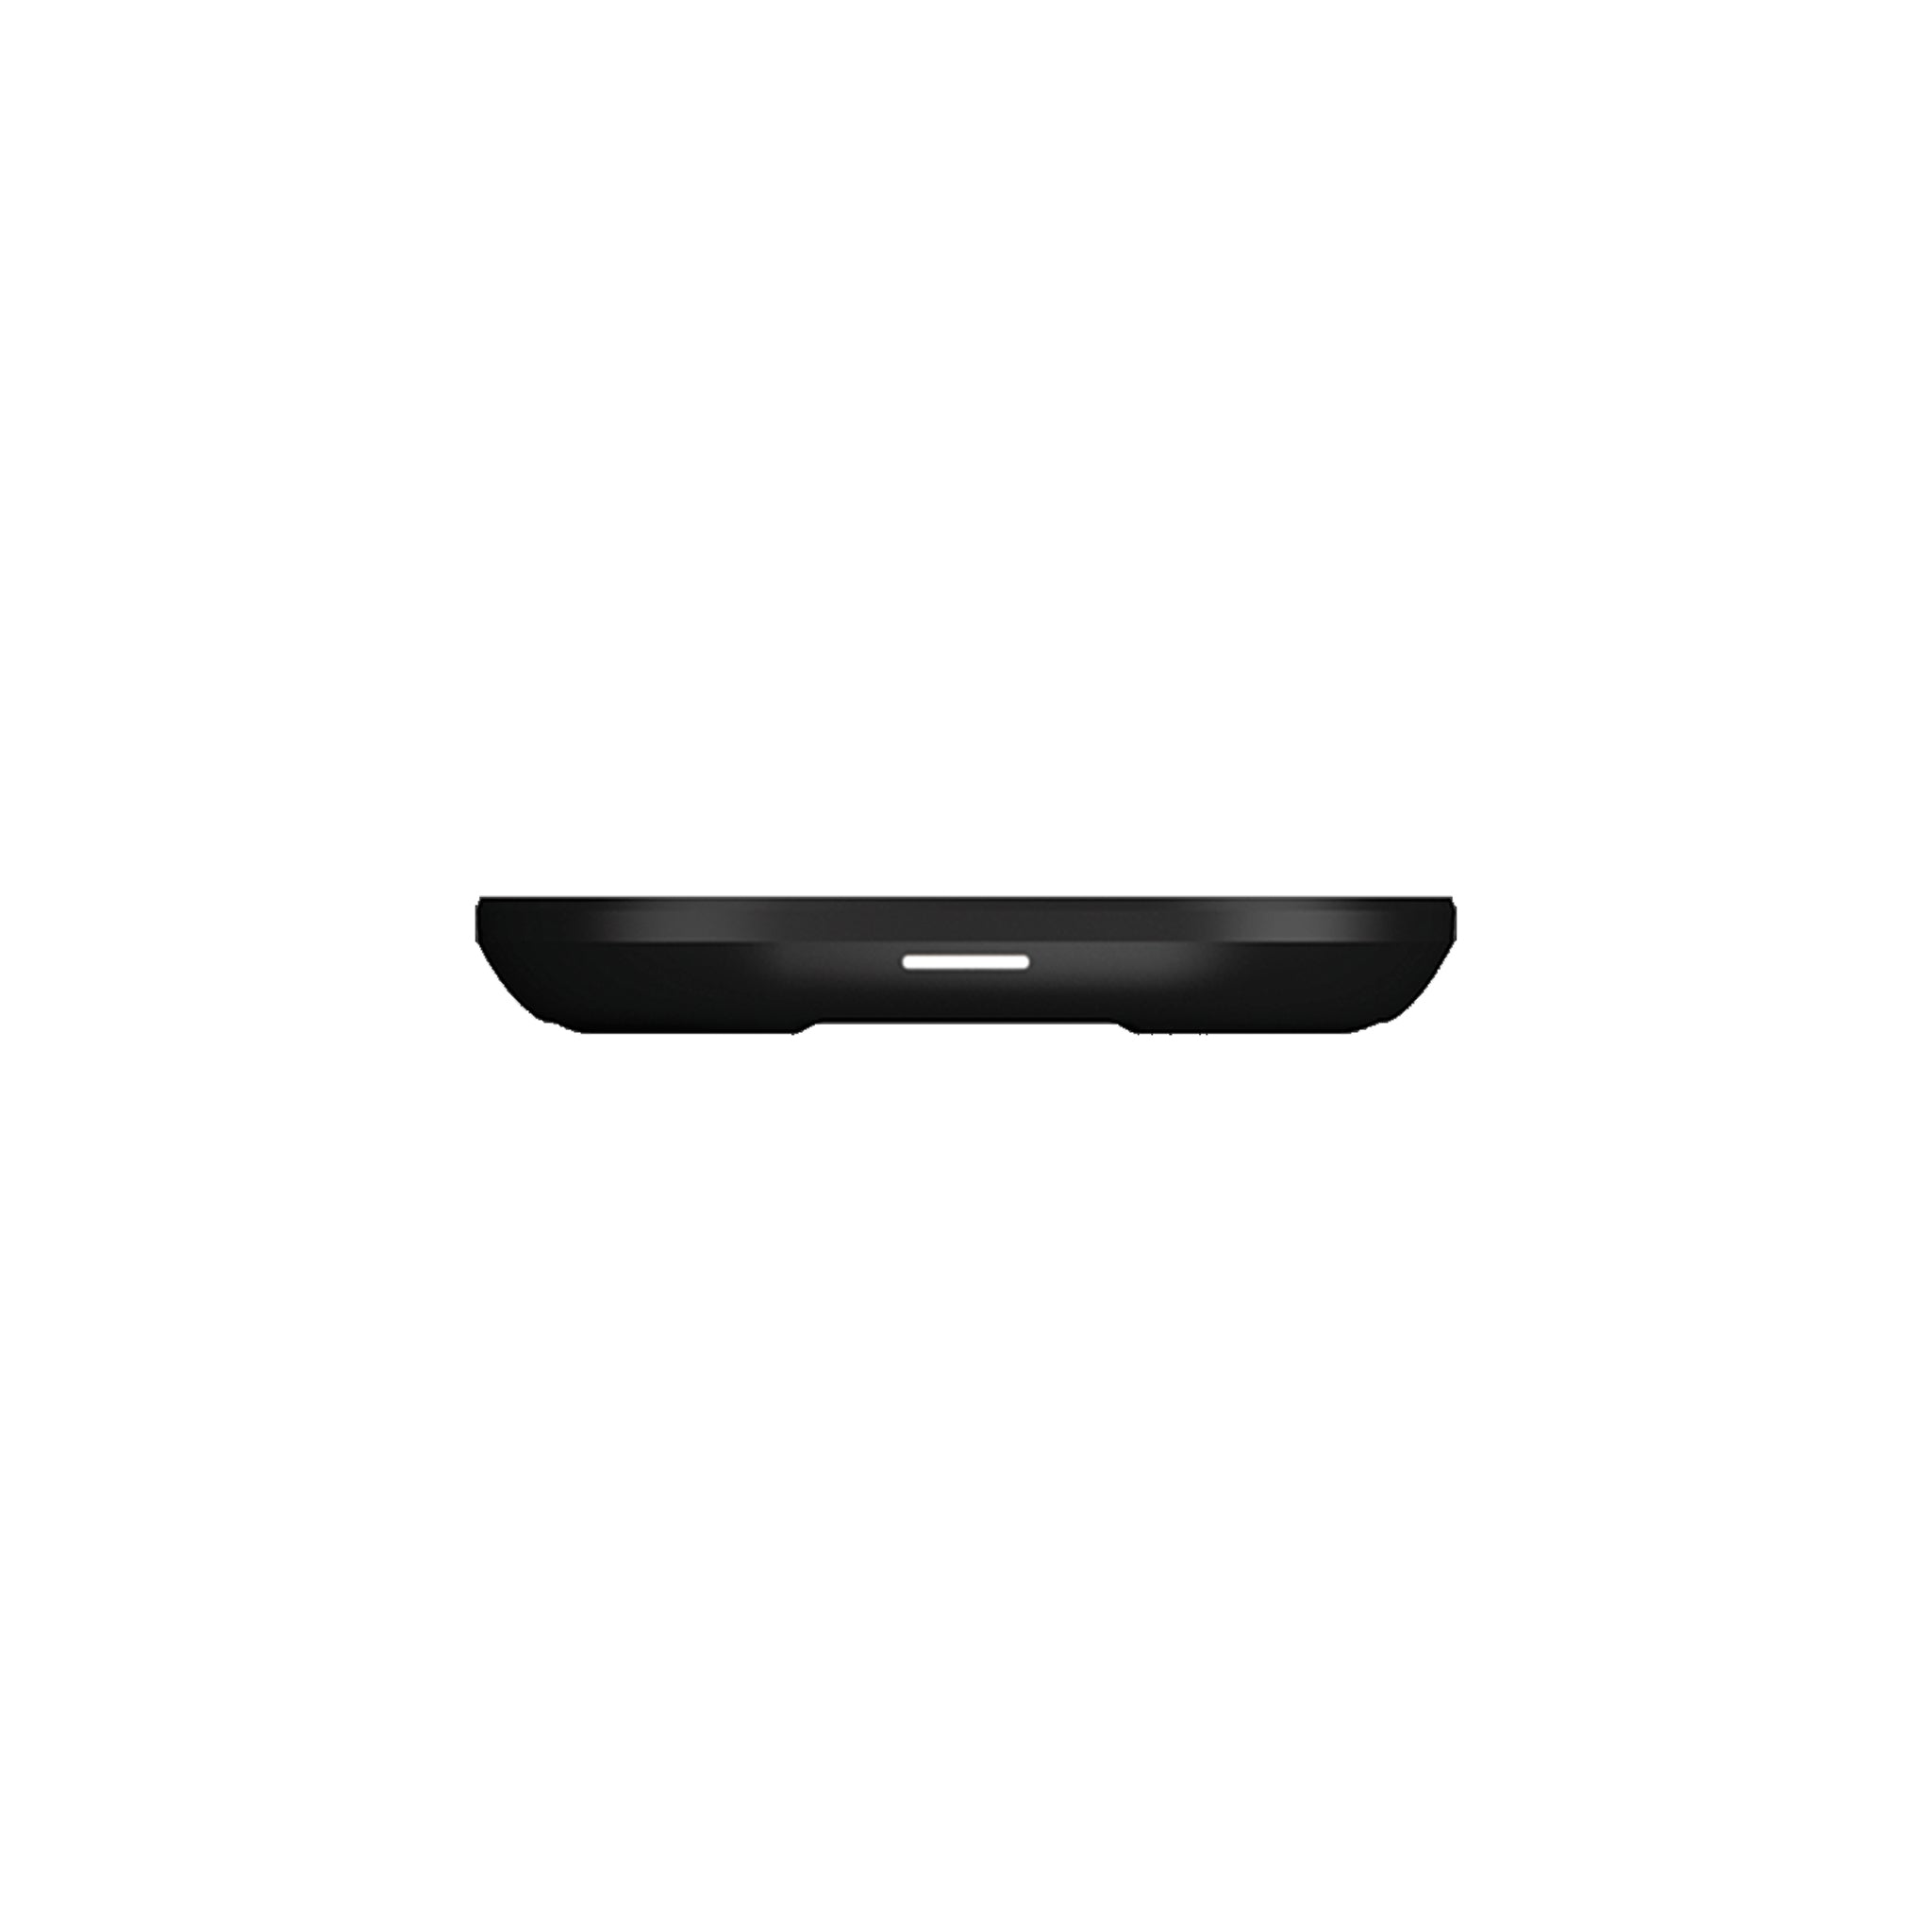 Mophie - Wireless Charing Pad 10w - Black